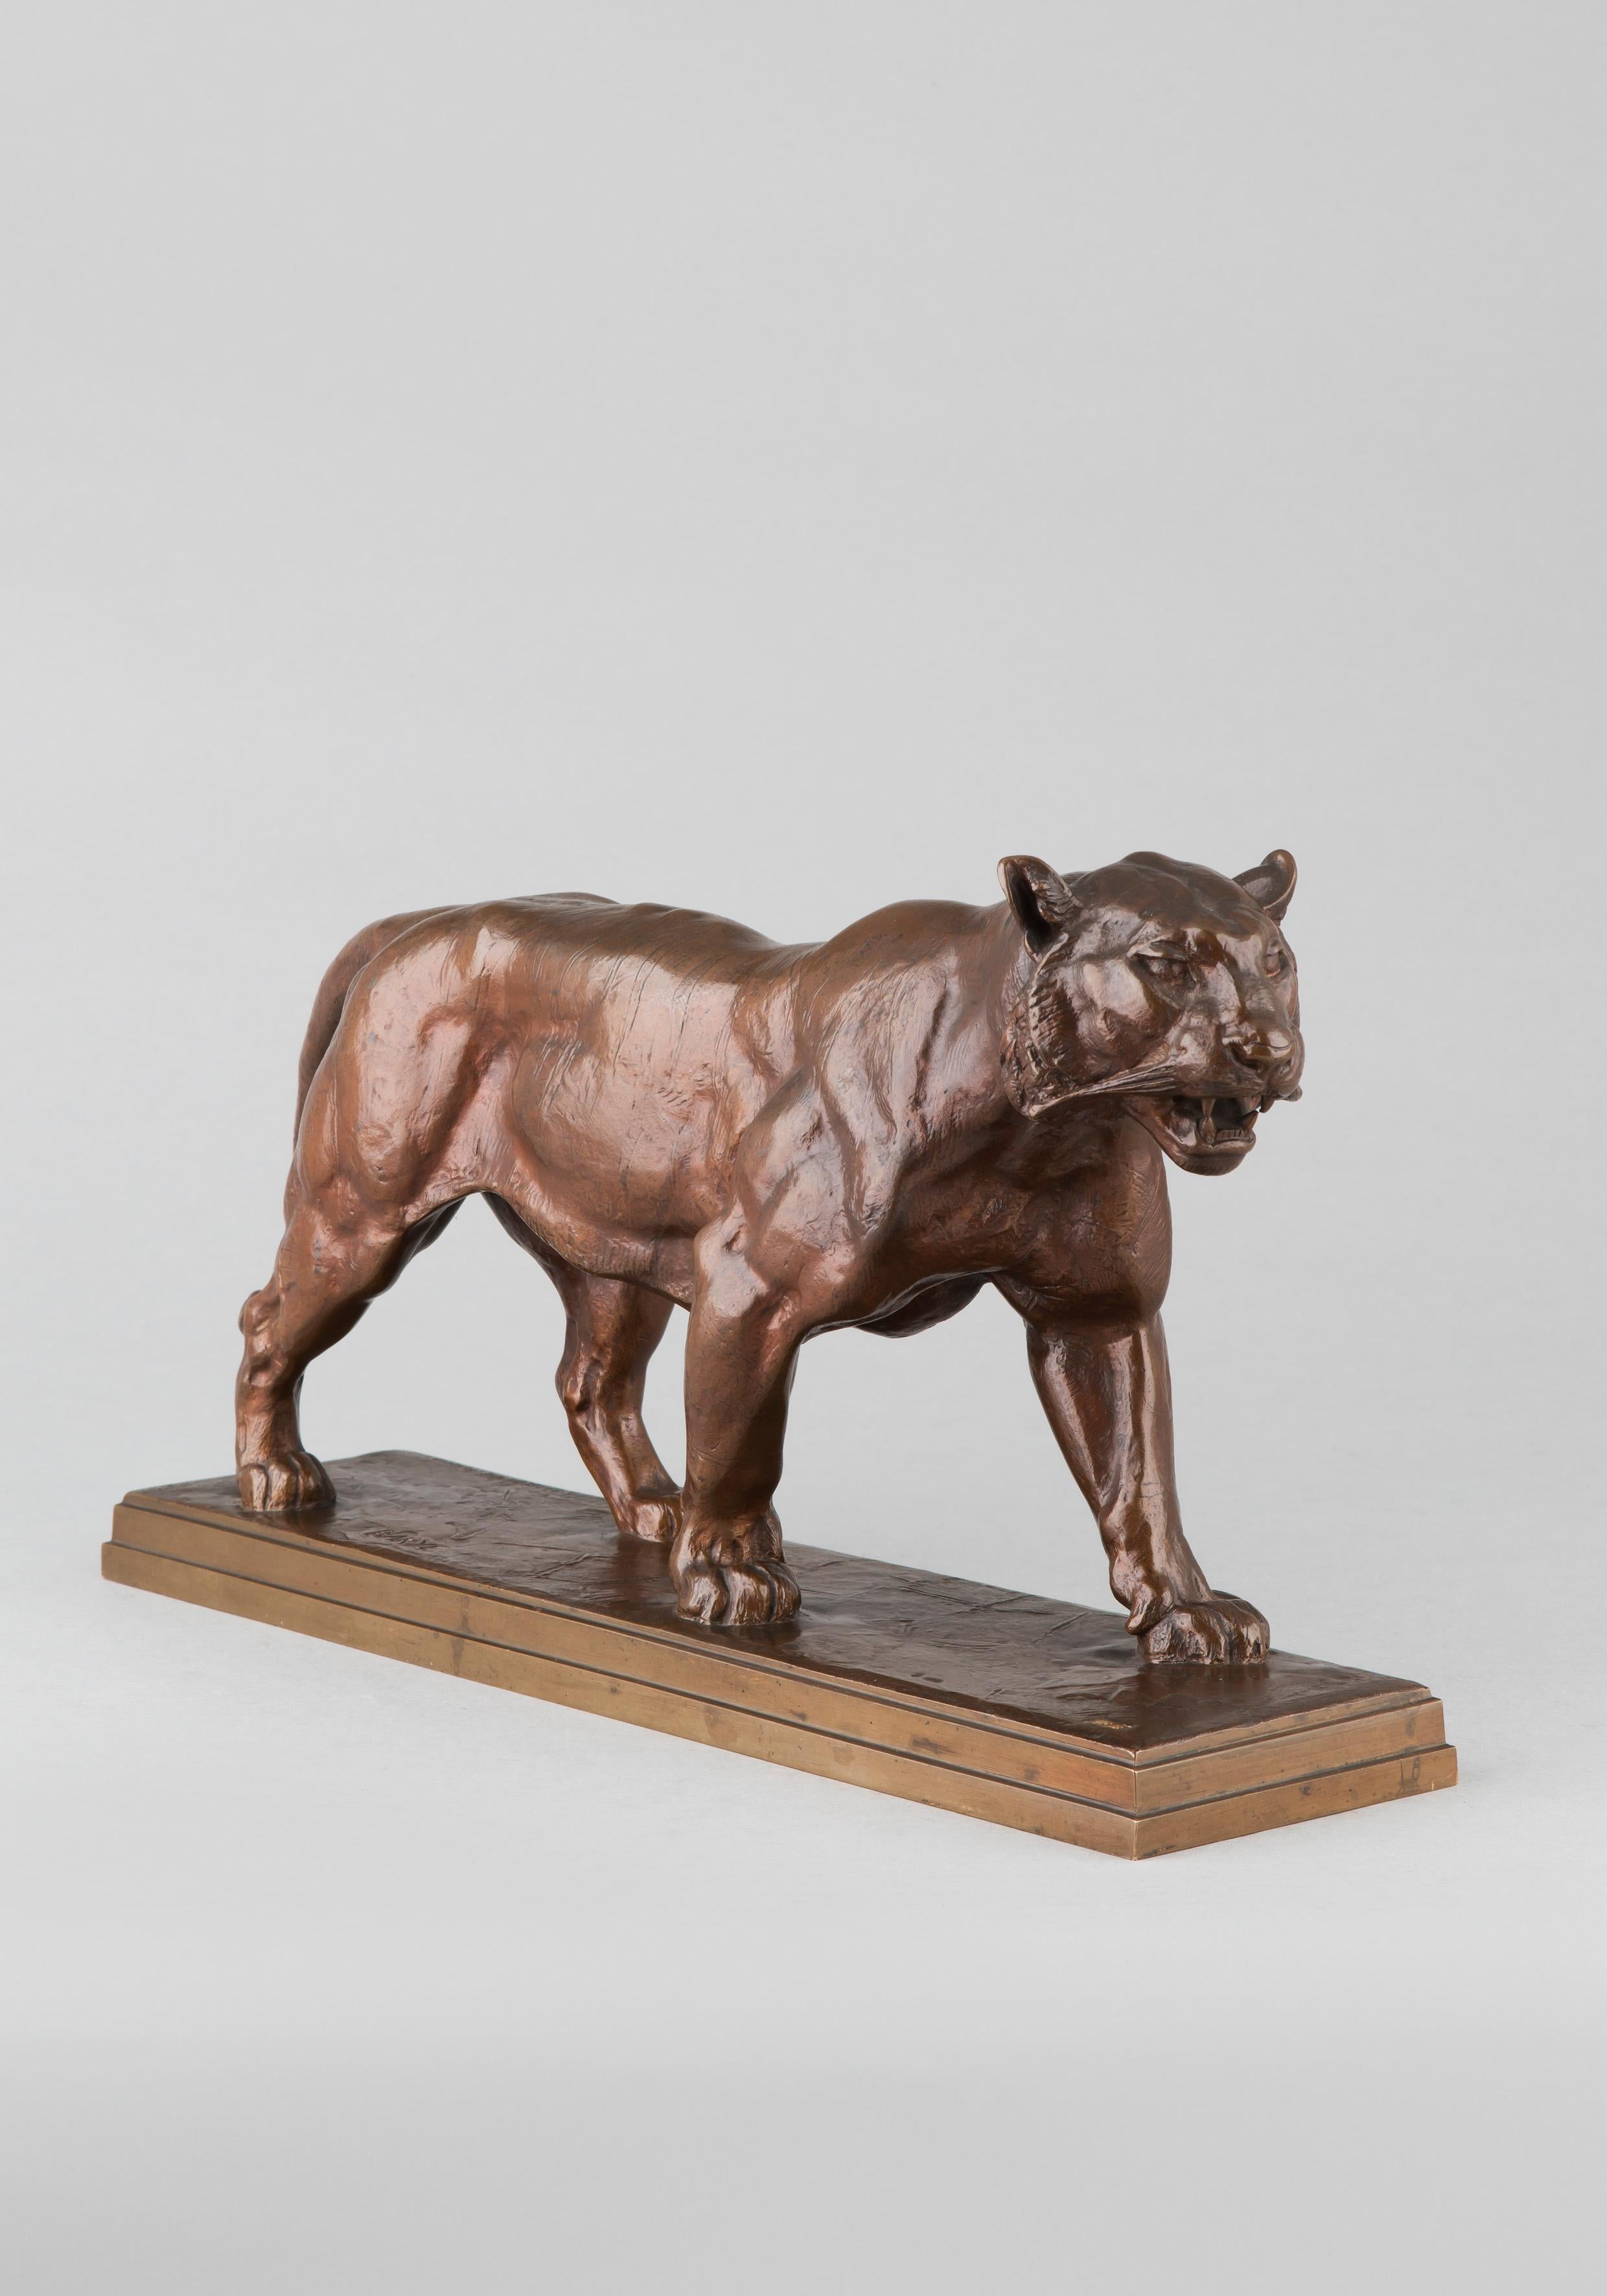 Tiger and Lion walking - Gold Figurative Sculpture by Antoine-Louis Barye